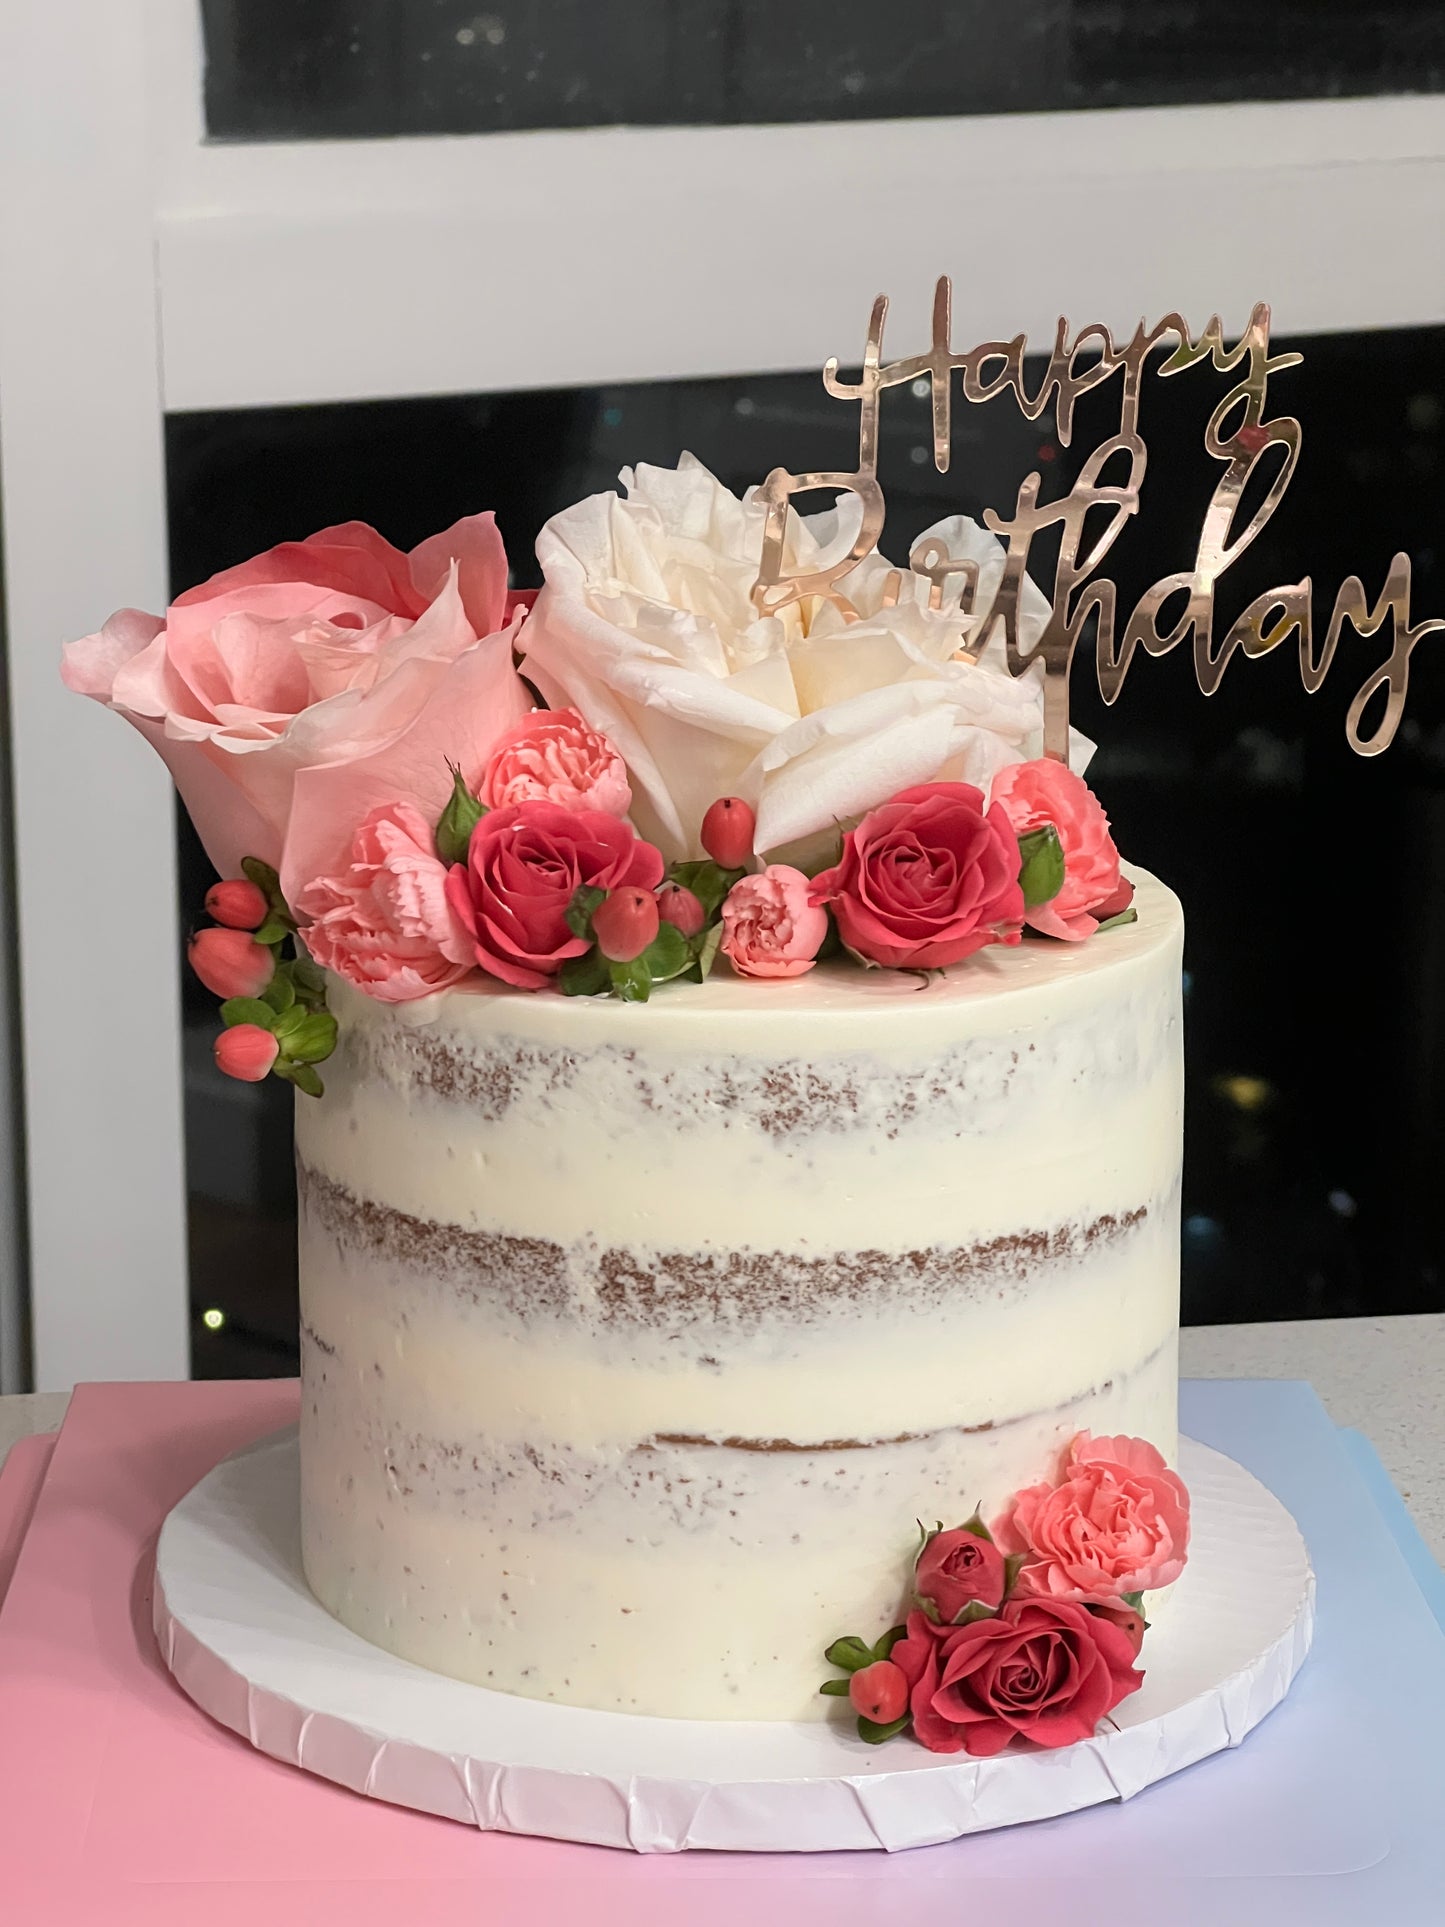 Naked Cake + Pick your own flowers